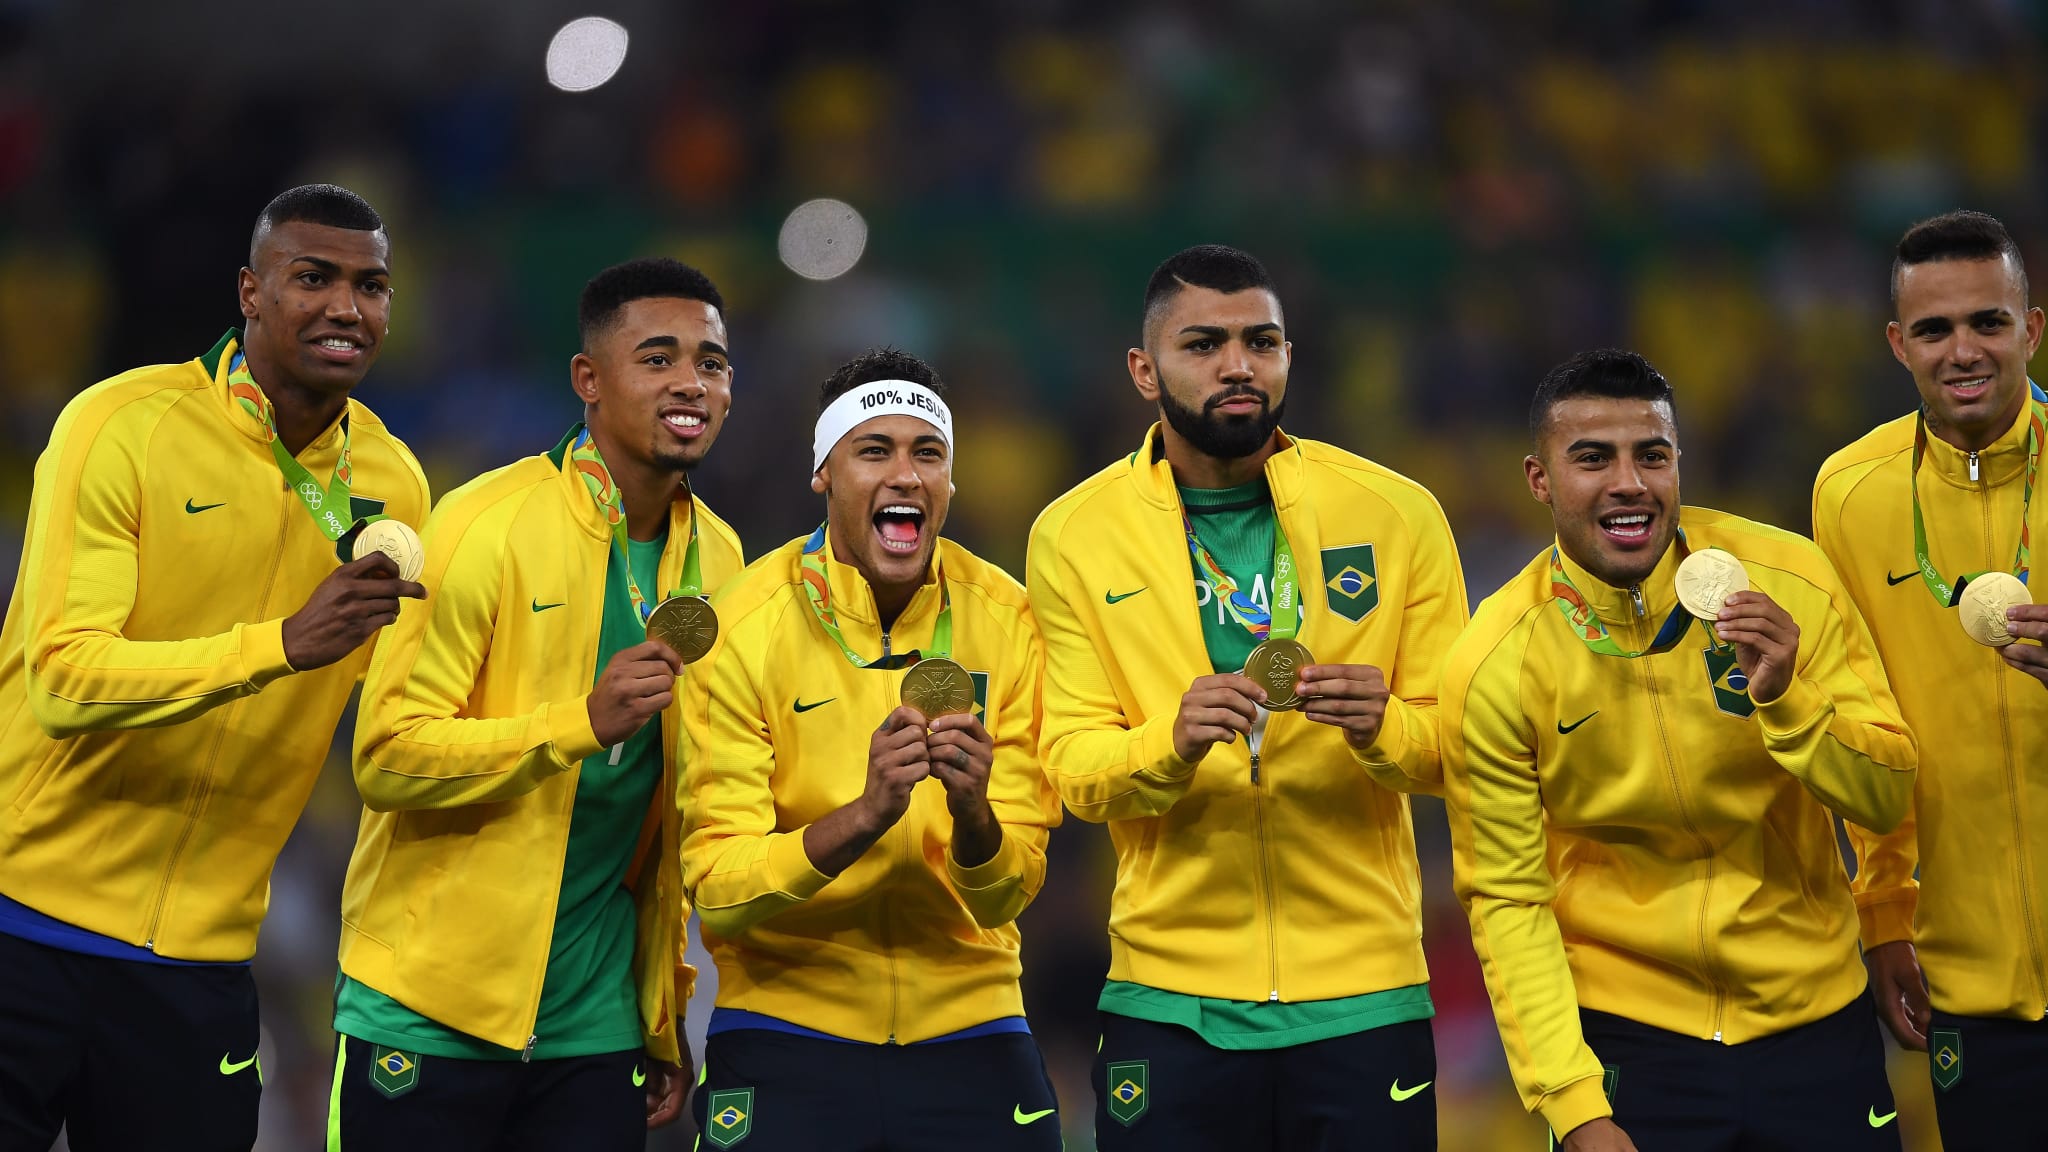 Olympic Football Tournaments 2016 game at its best in Brazil